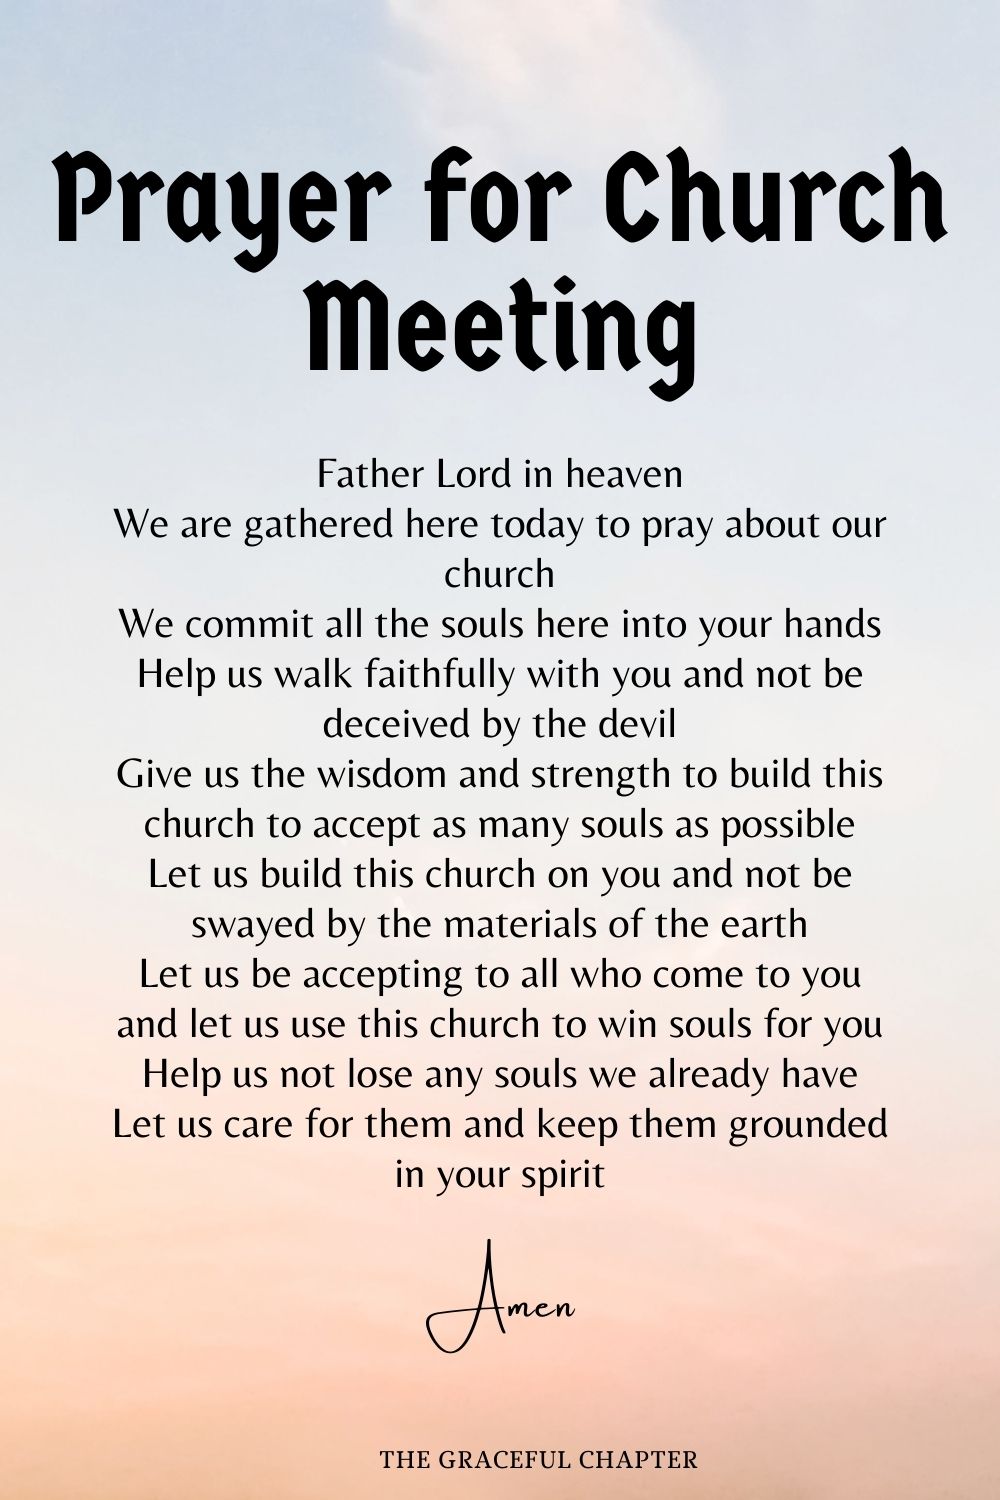 Prayer for Church Meeting -prayers for meetings and gatherings